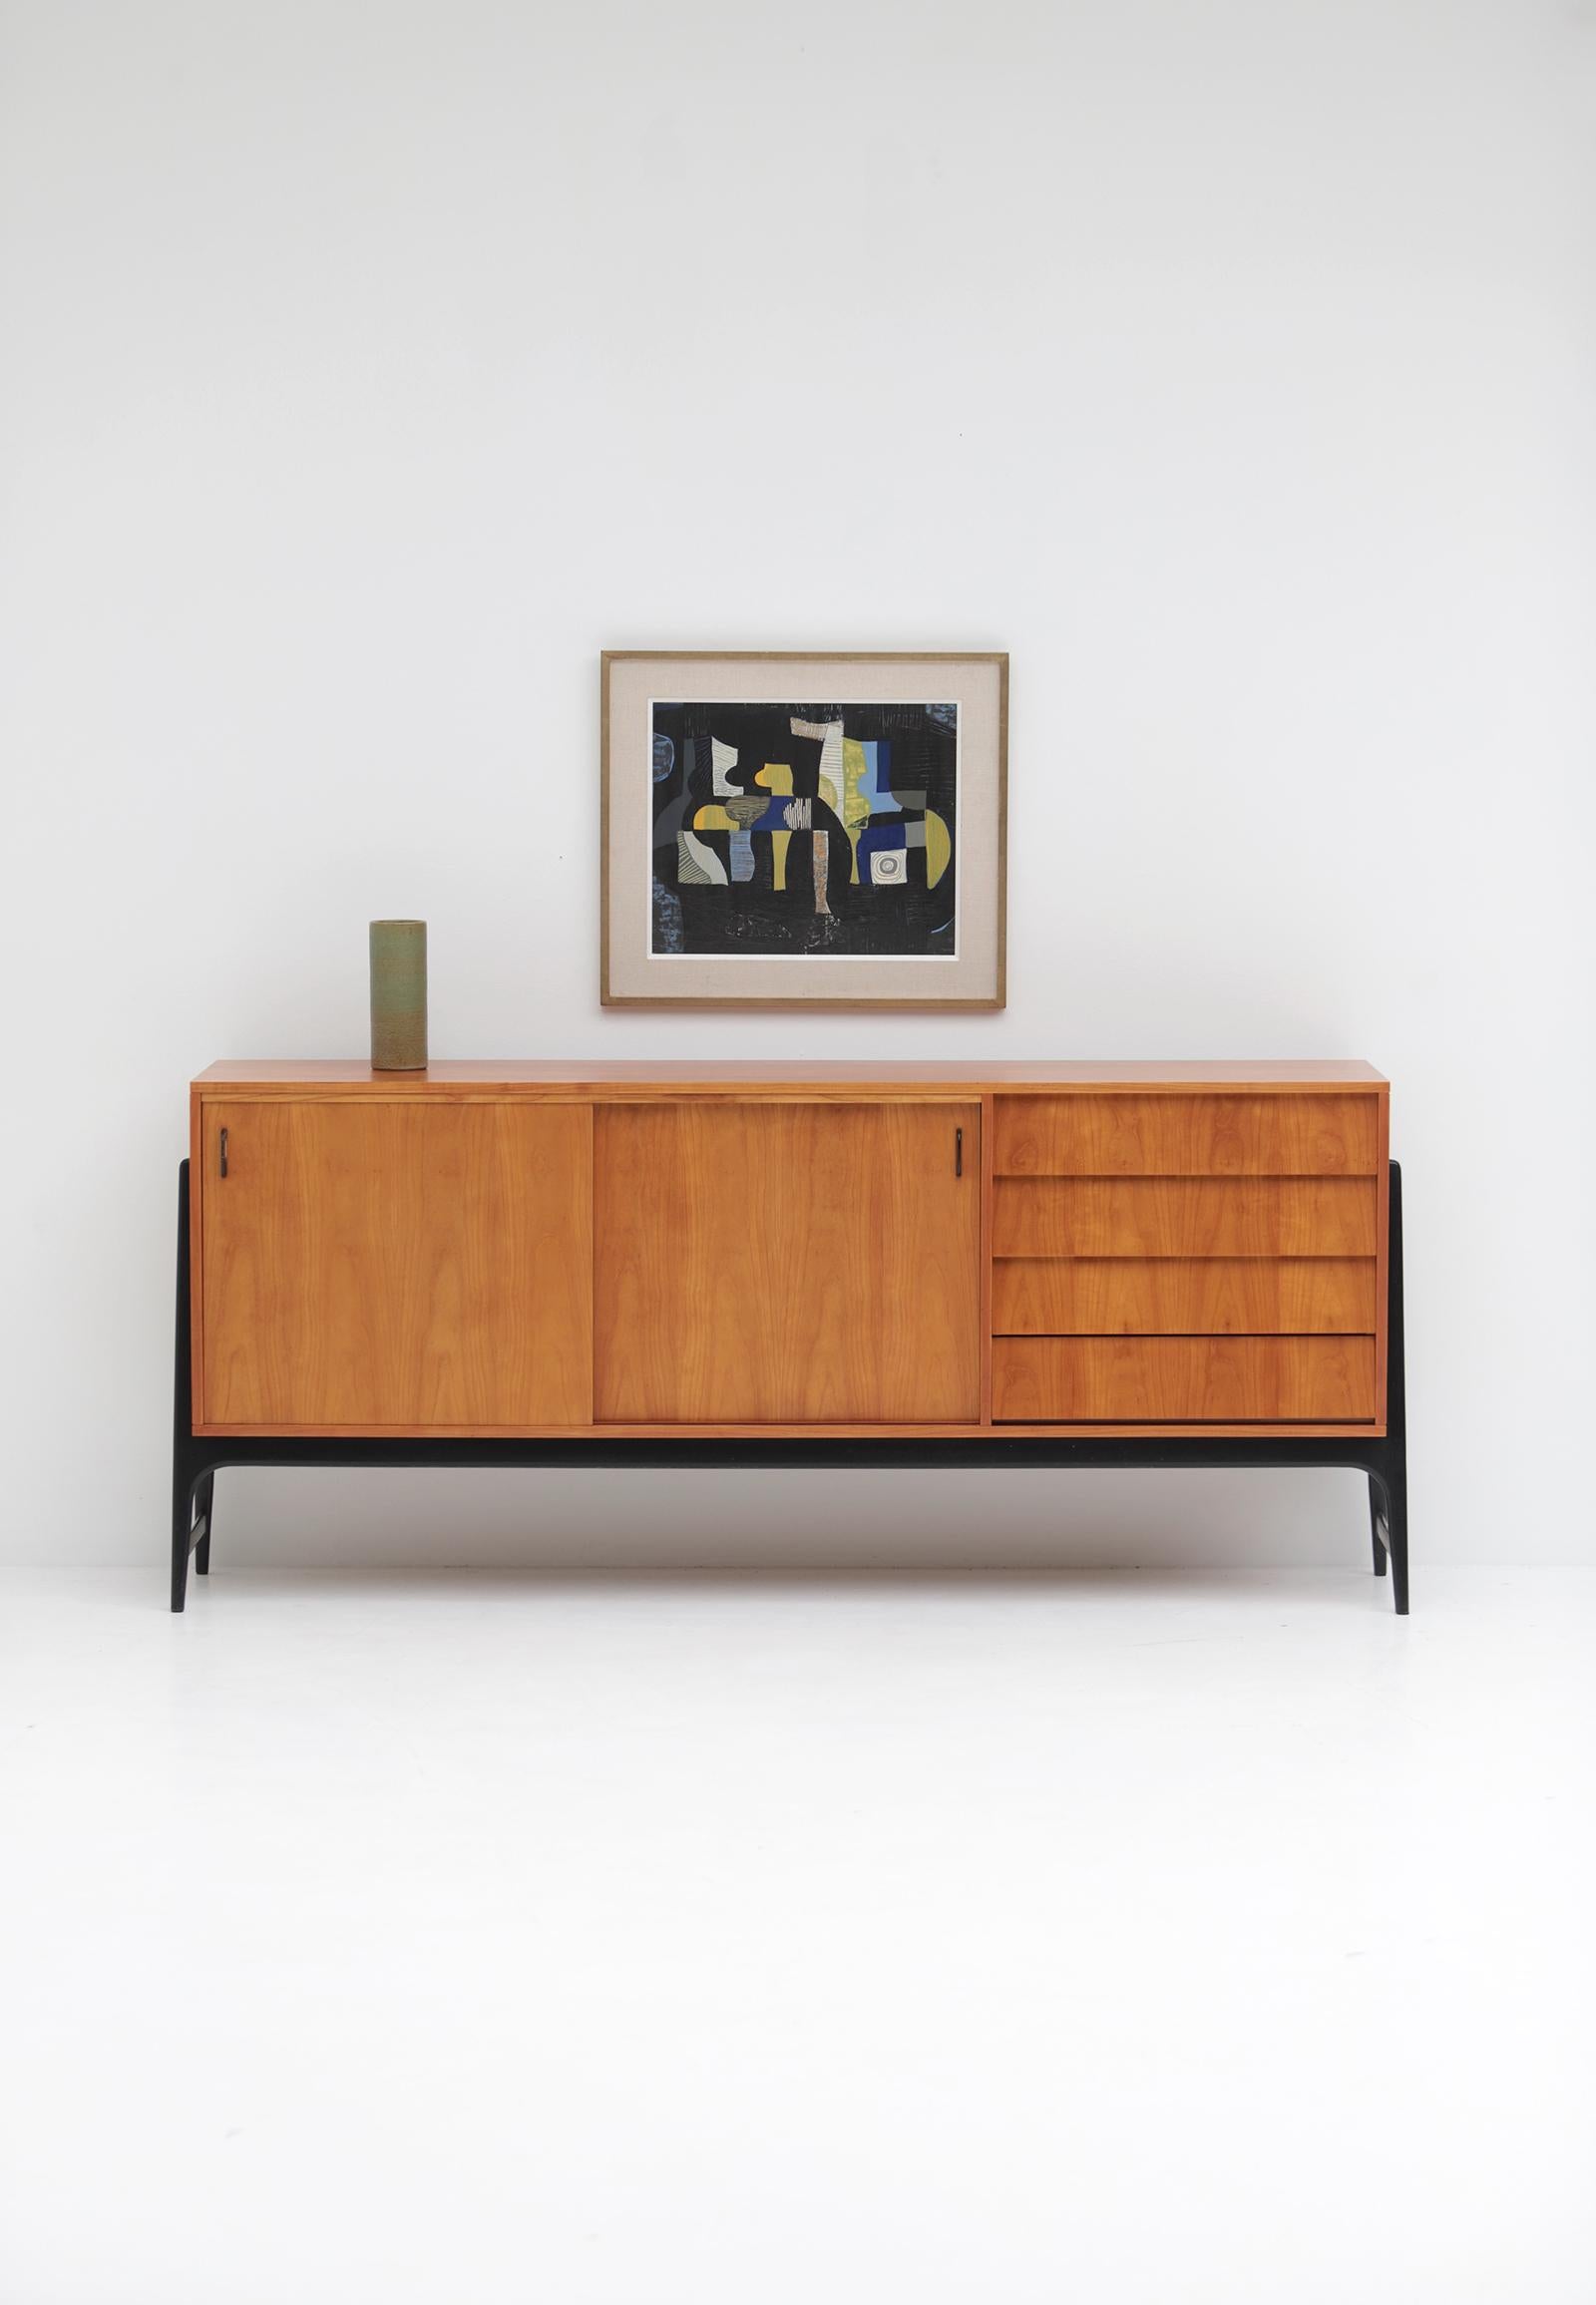 Unique sideboard by Alfred Hendrickx designed in 1958 for Belform. This sideboard is becoming more and more a unique find than a common find. Especially this edition in deep honey colored wood with drawers on the right side and sliding doors.